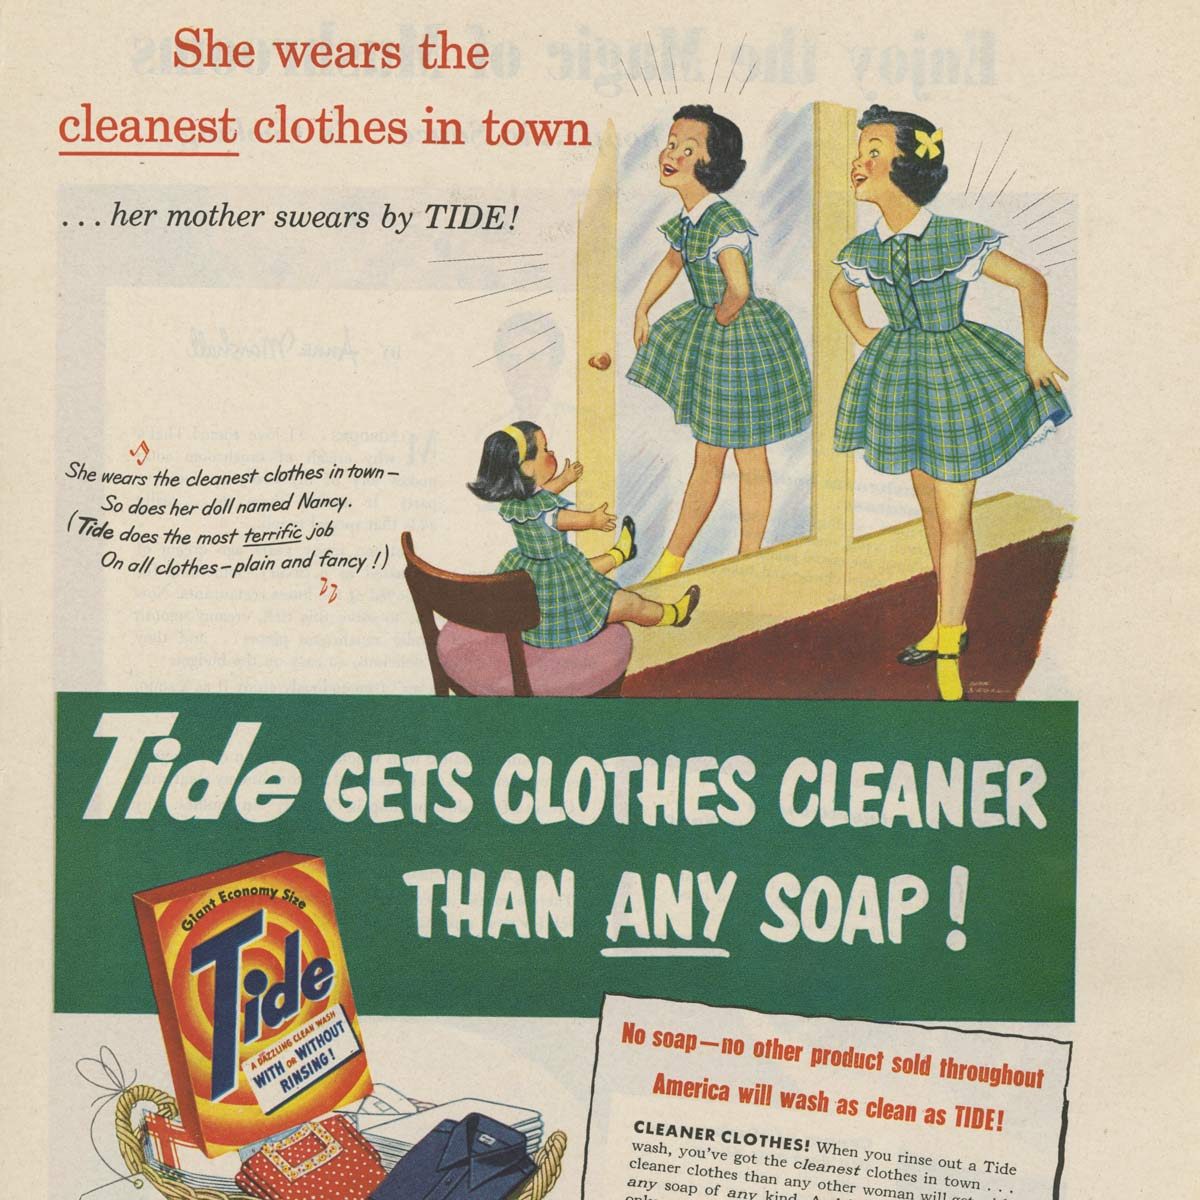 Retro cleaning products of yesteryear